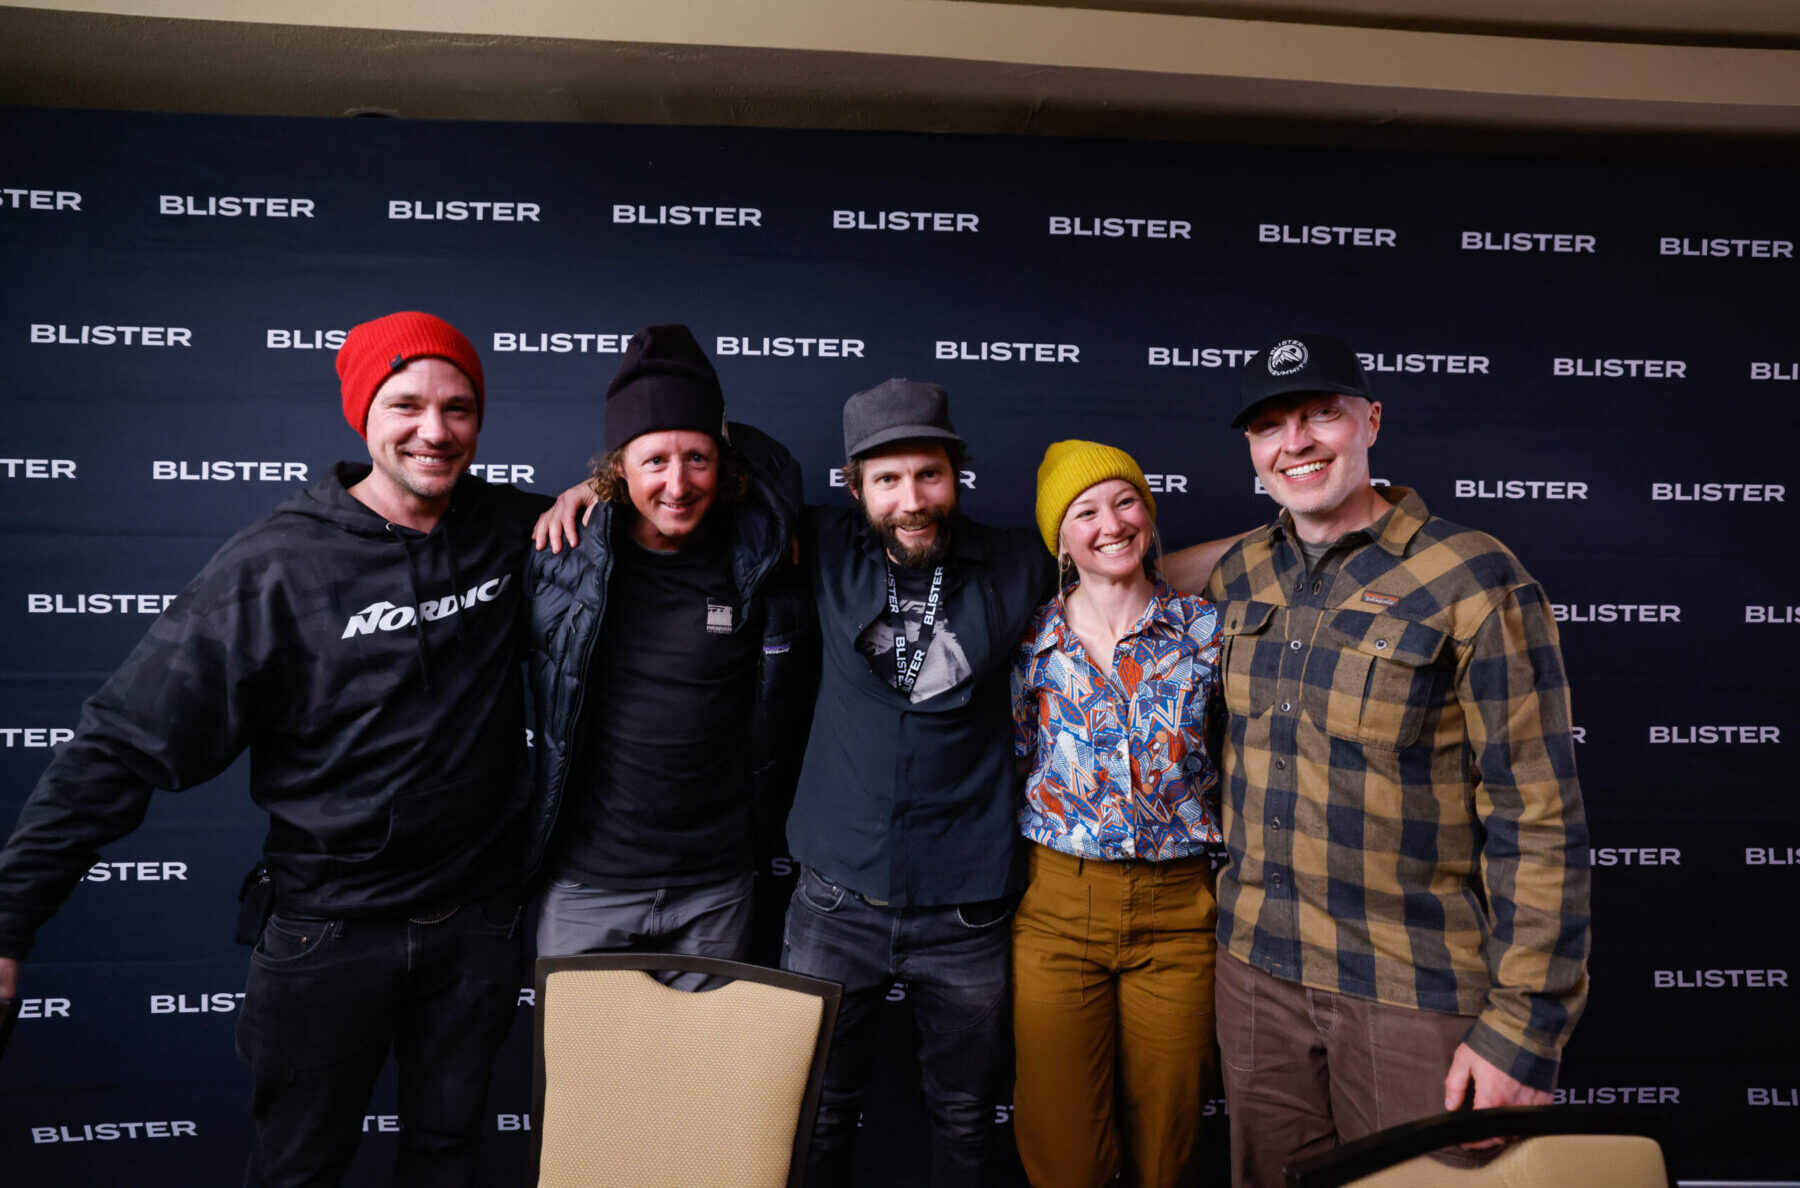 Left to right: Rory Bushfield, Forrest Shearer, Hoji, McKenna Peterson, and Jonathan Ellsworth at Blister Summit 2023 (photo by Taylor Ahearn)